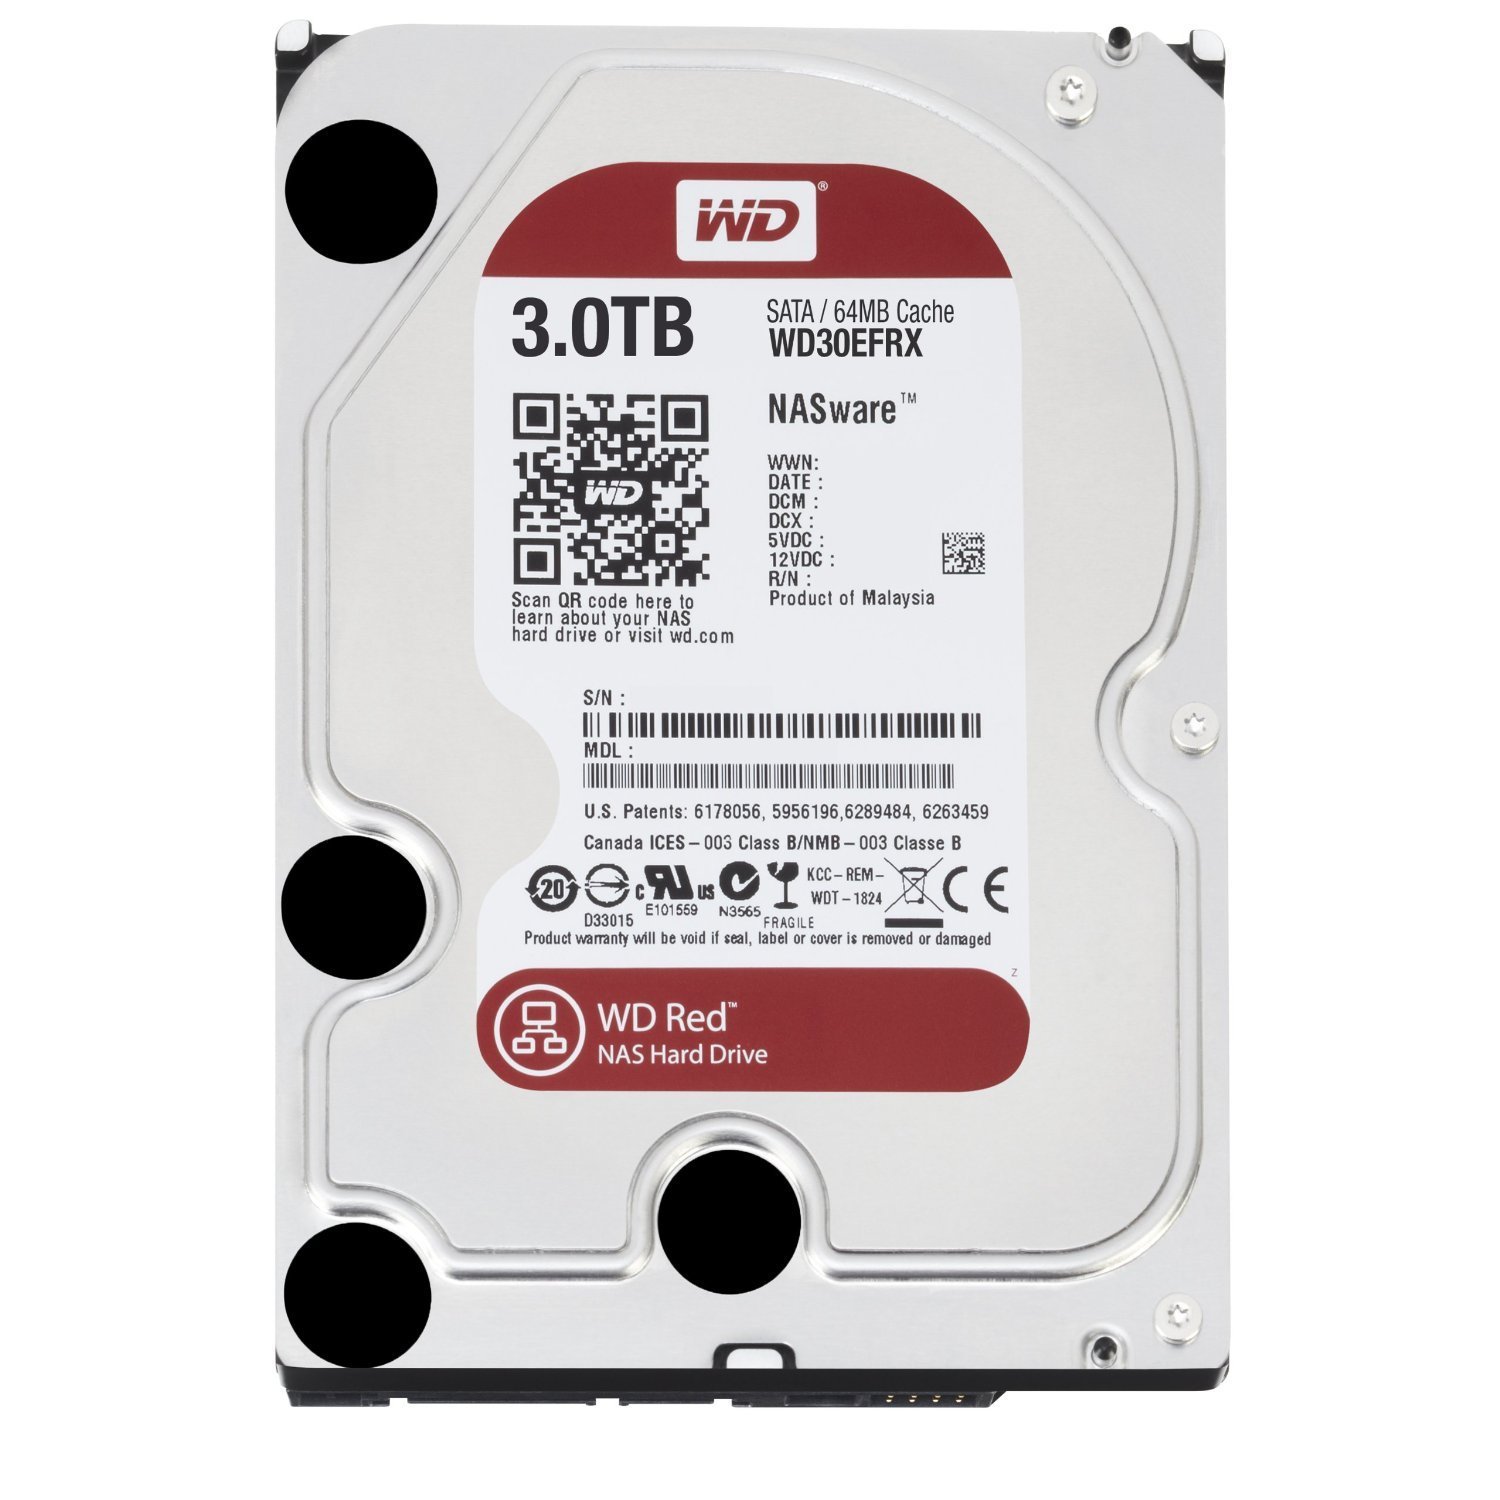 WD Red 3 TB NAS Hard Drive: 3.5 Inch, SATA III, 64 MB Cache - WD30EFRX